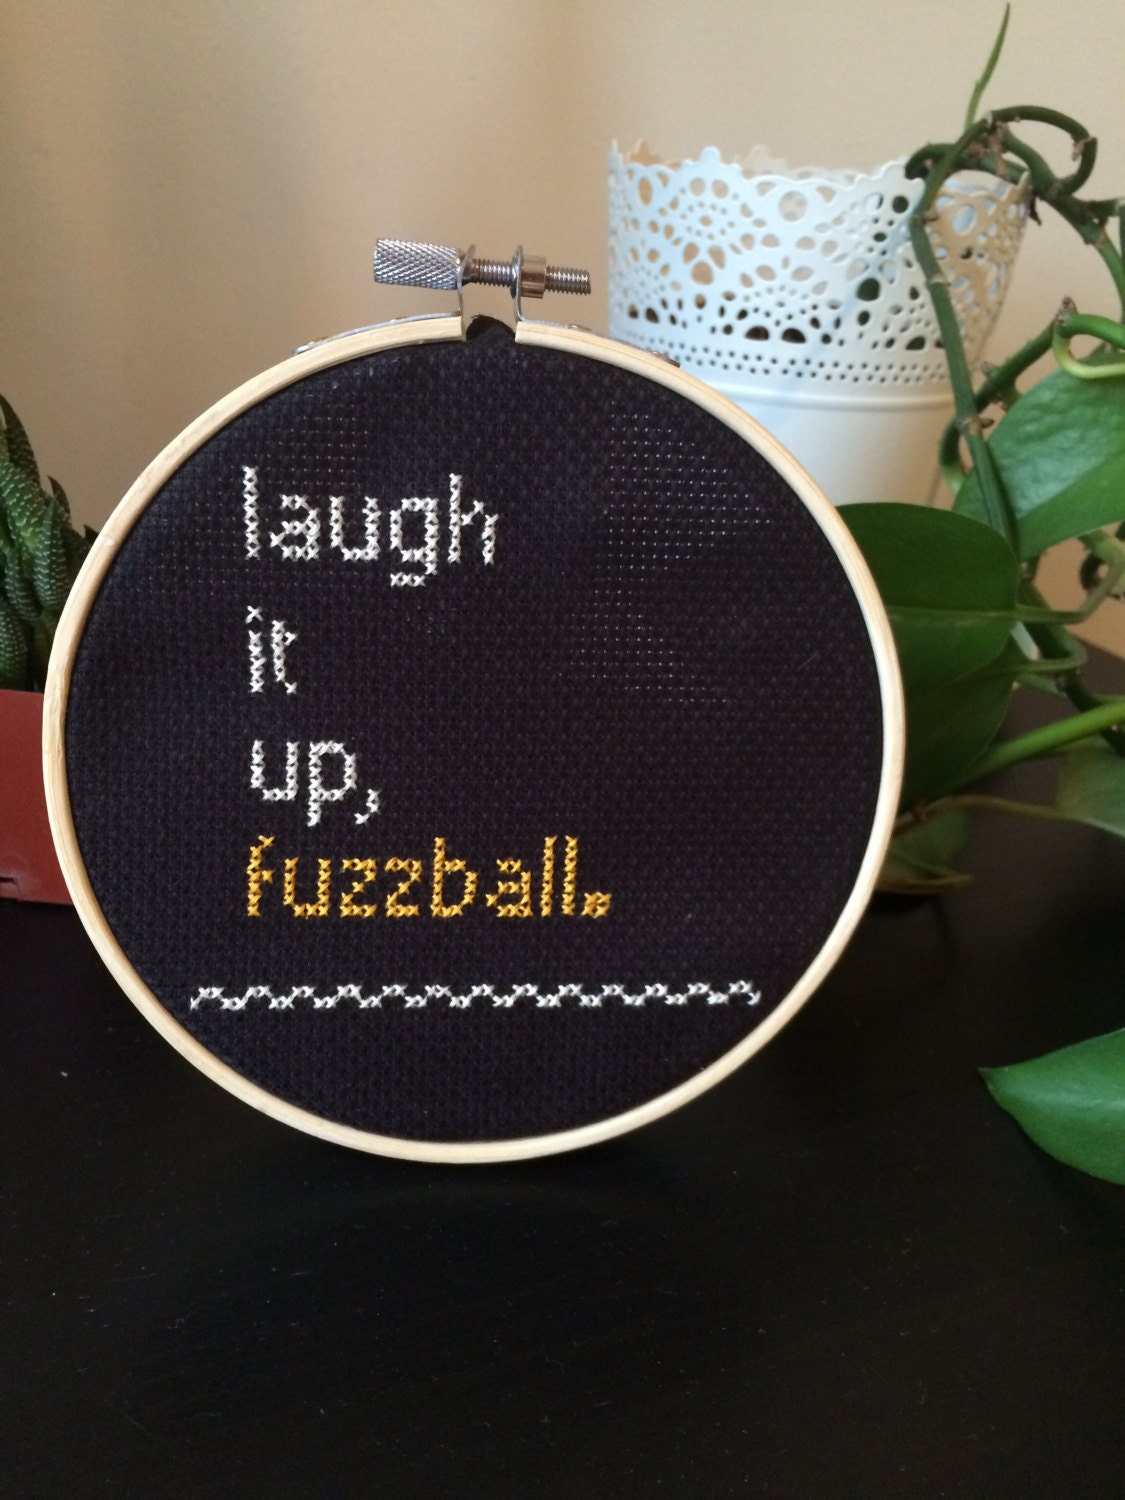 Star Wars Han Solo Inspired 'Laugh It Up Fuzzball'